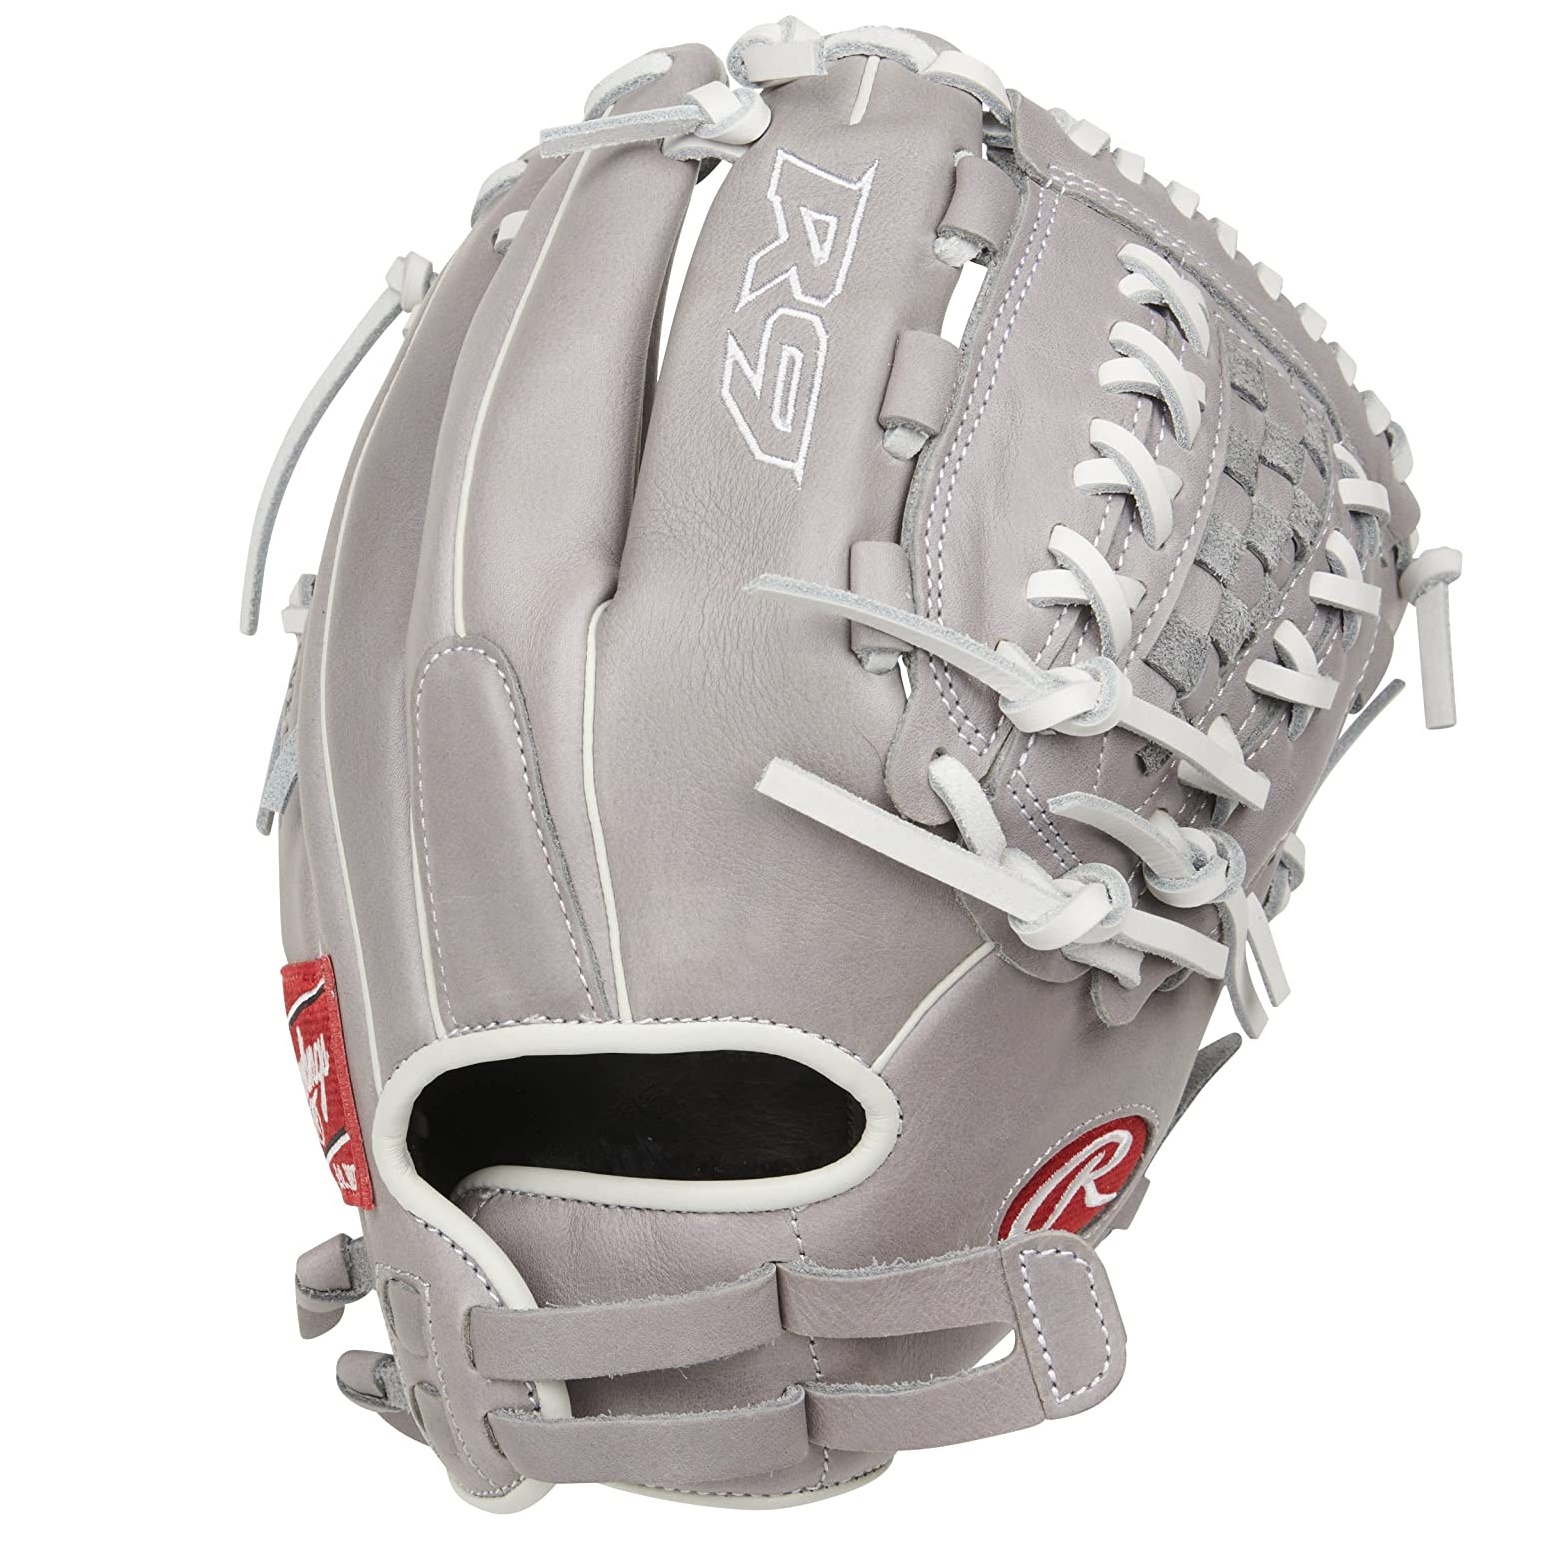 This series features soft, durable all-leather shells designed to be game-ready. With pro style patterns and a reinforced palm pad for impact reduction, this series is perfect for the Select Player in the 8-14 age range.